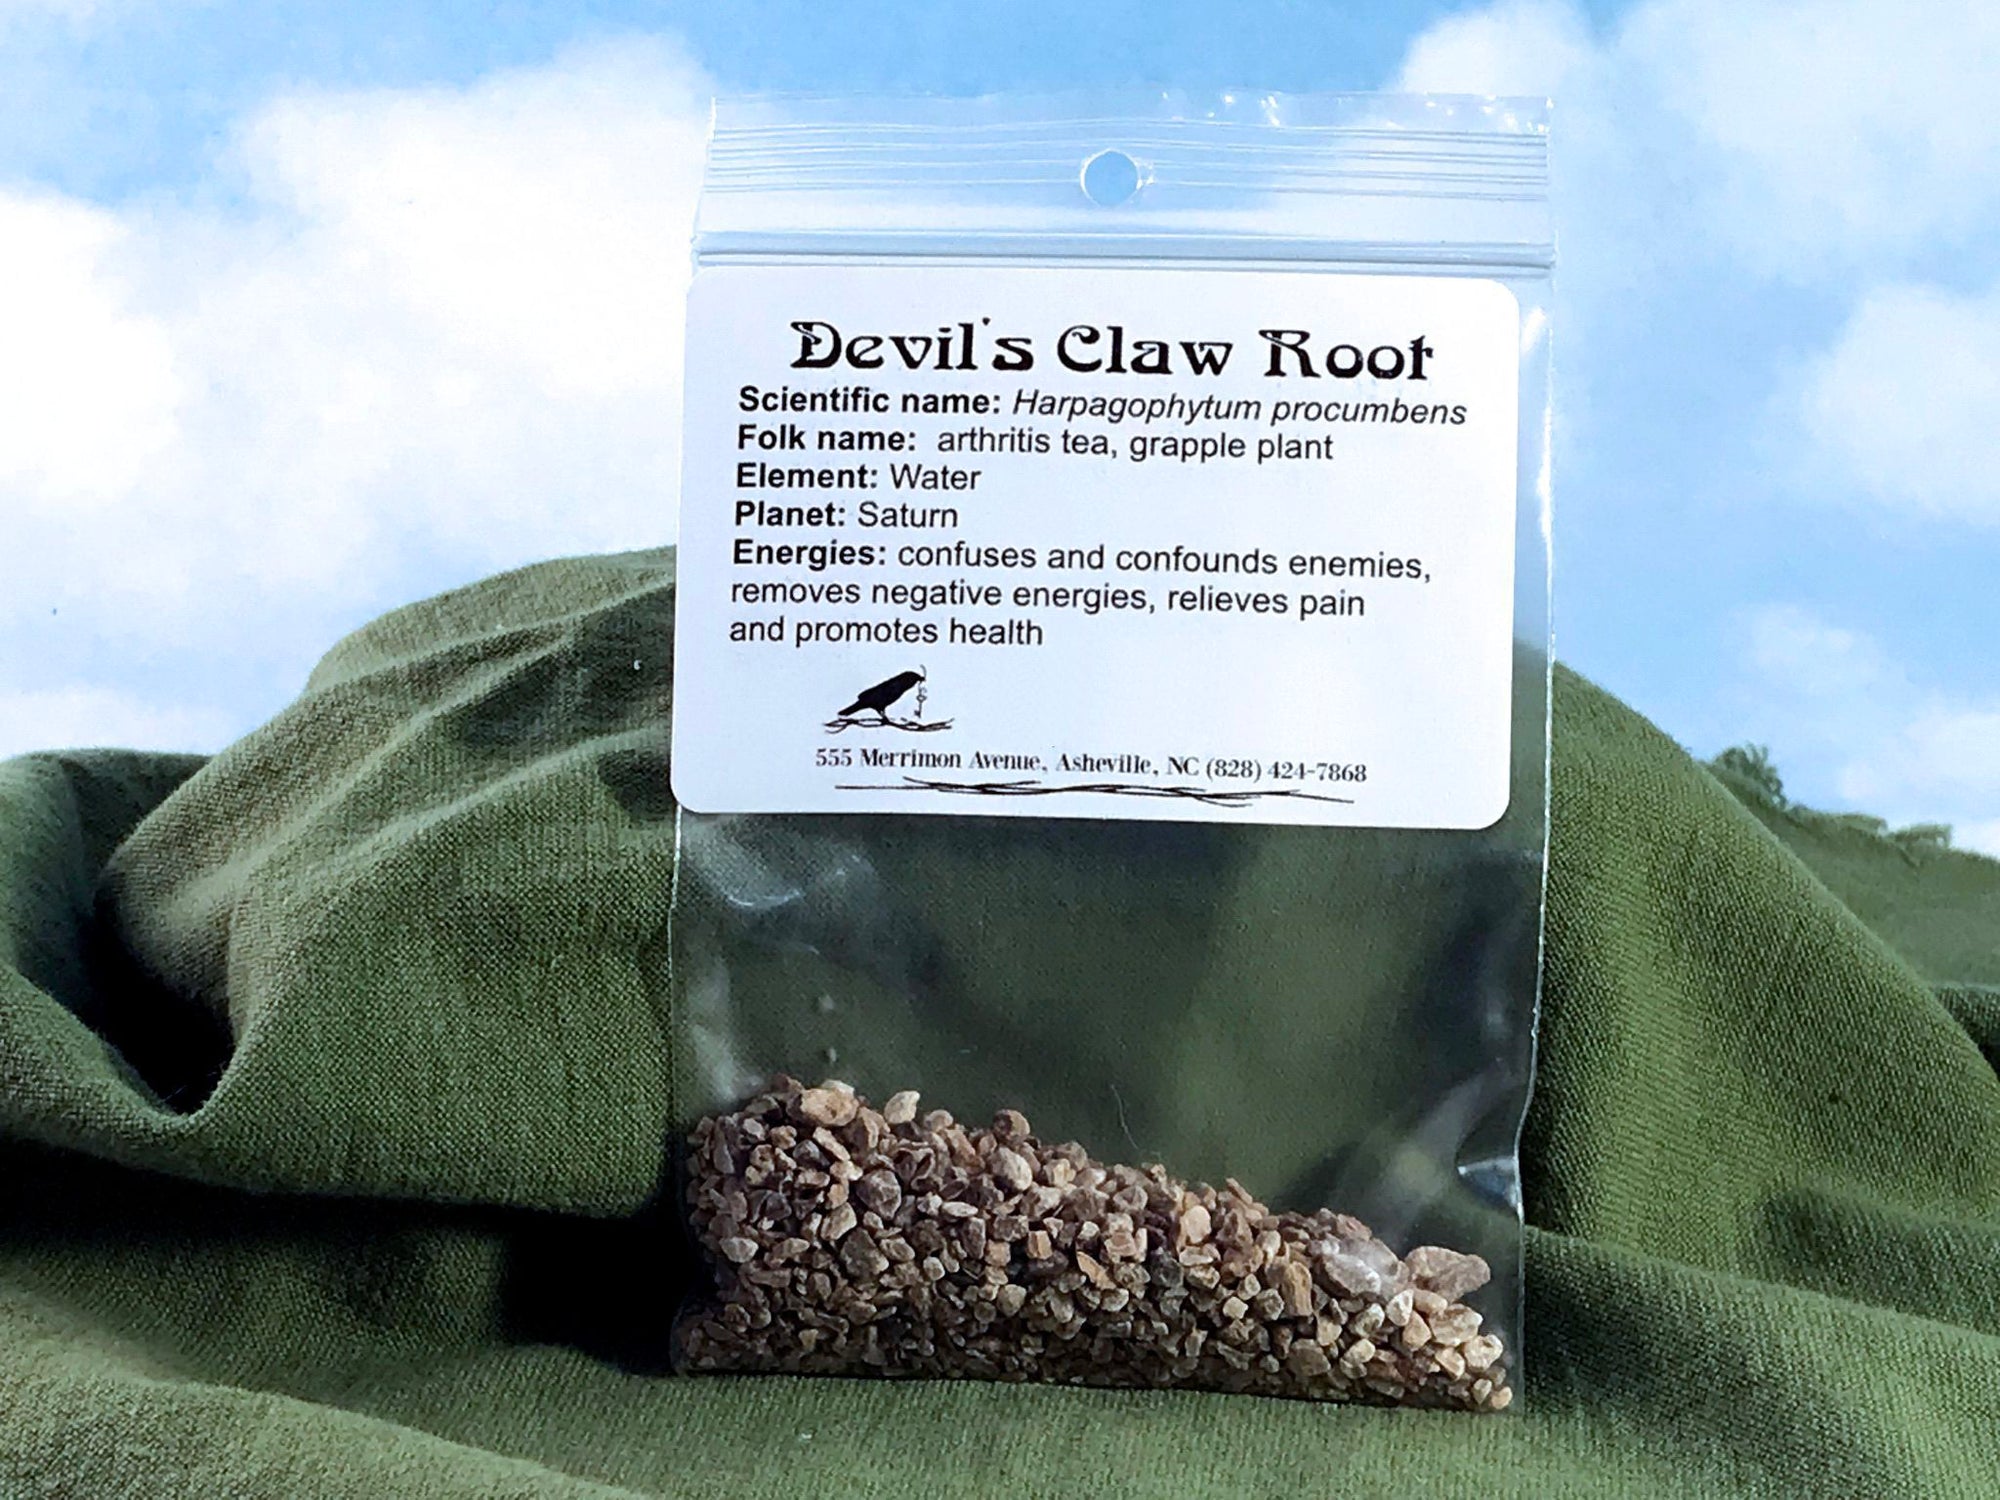 Devil's Claw Root